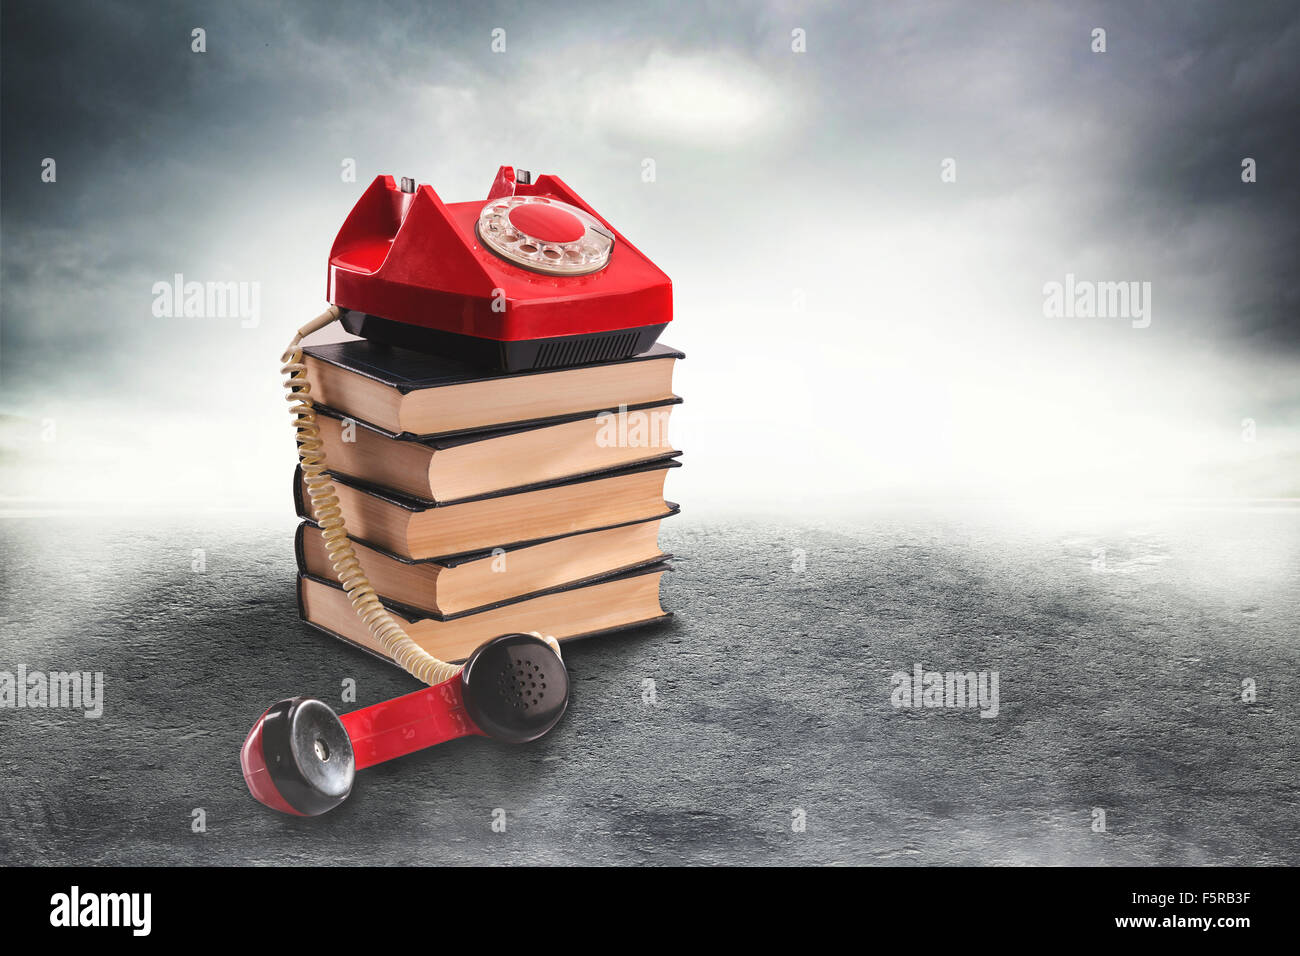 Vintage red telephone on a misty road Stock Photo